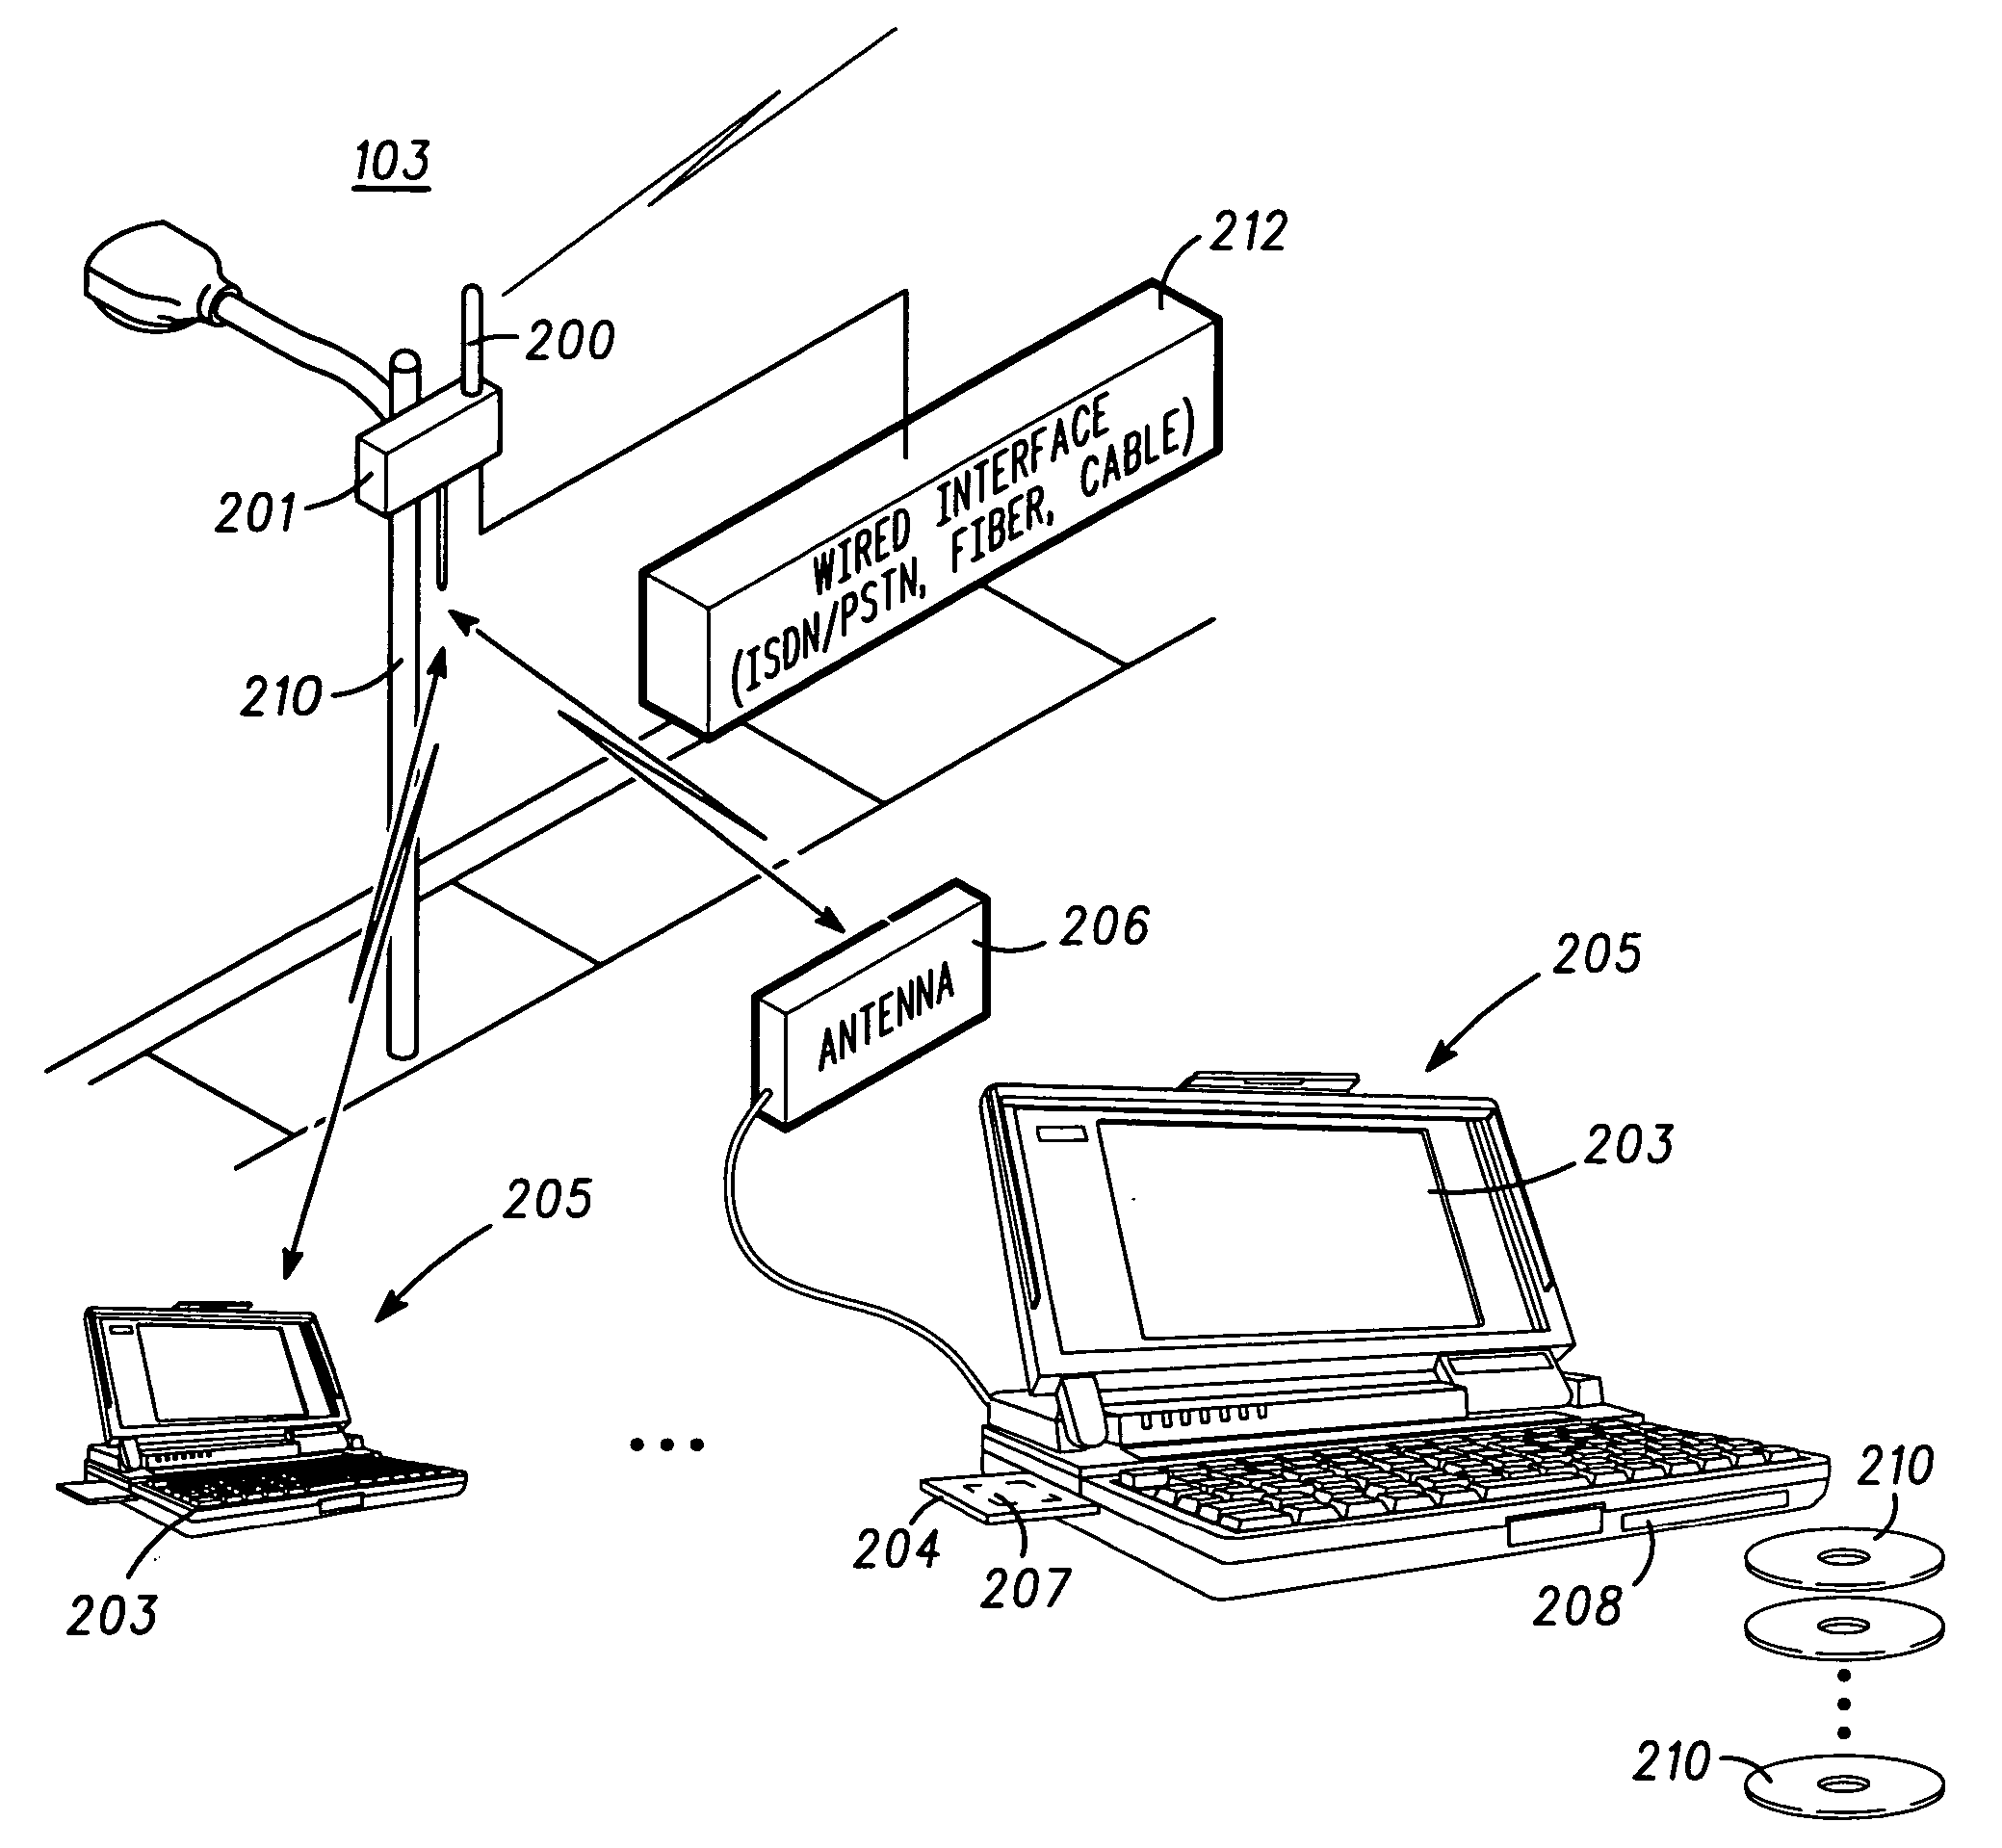 Satellite based data transfer and delivery system